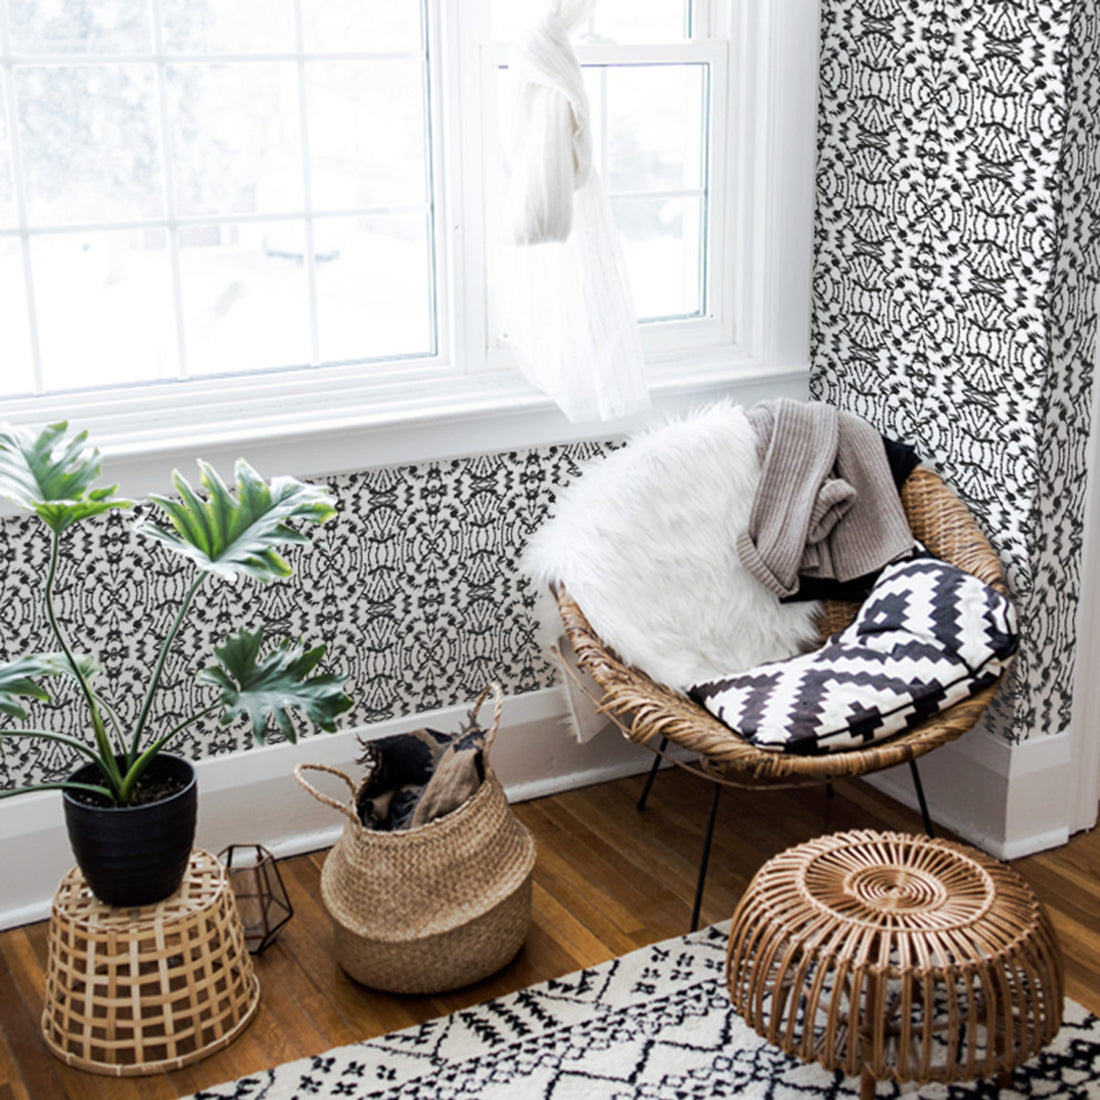 Tribal print removable wallpaper in black and white